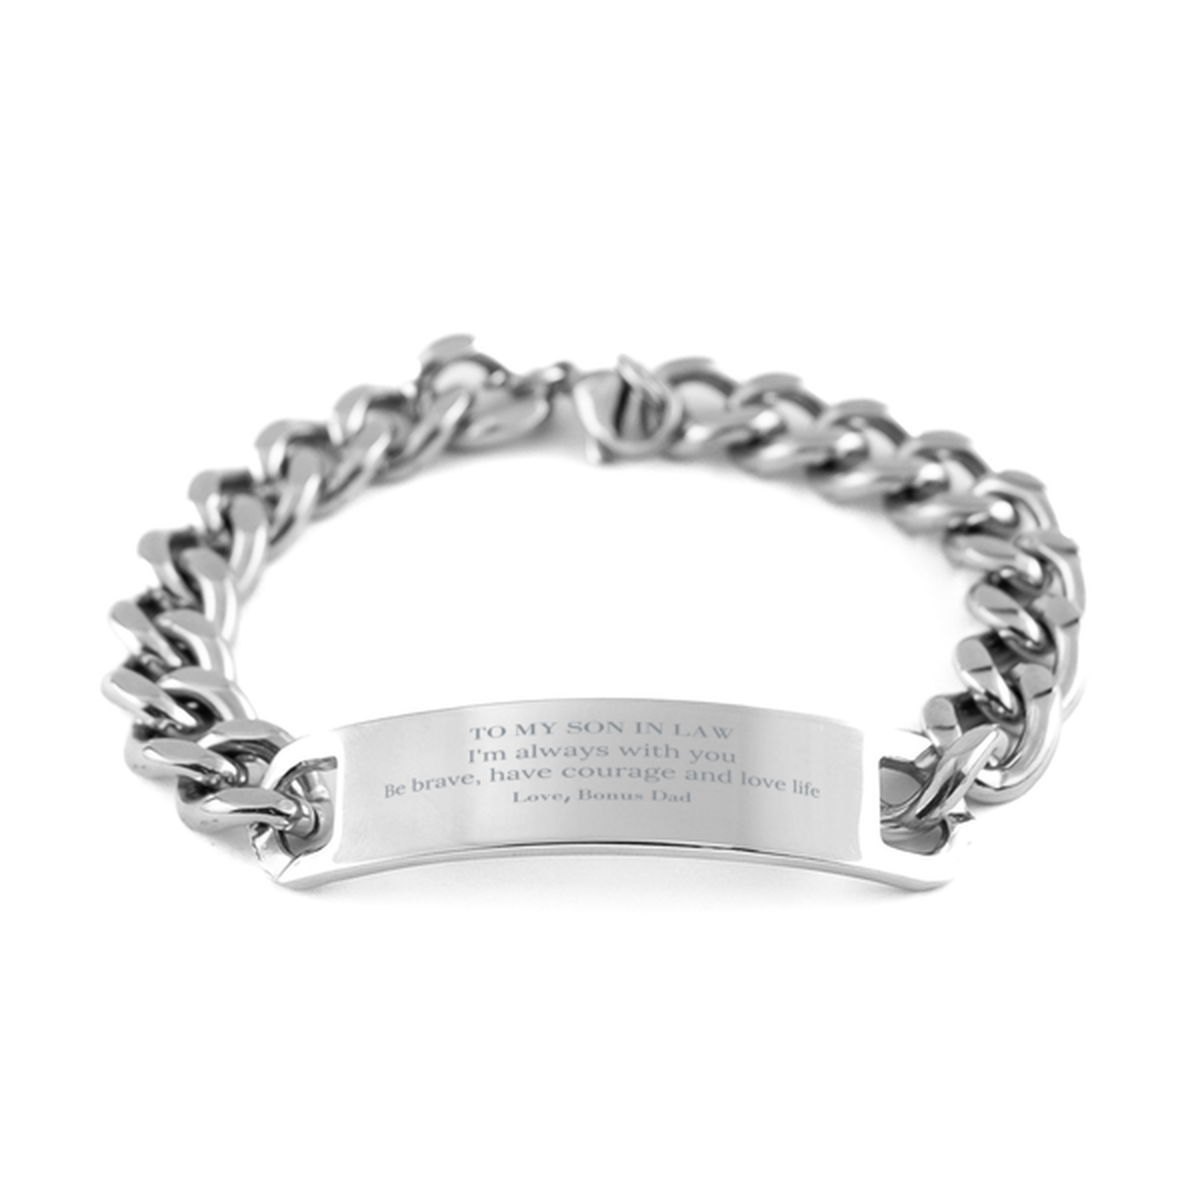 To My Son In Law Gifts from Bonus Dad, Unique Cuban Chain Stainless Steel Bracelet Inspirational Christmas Birthday Graduation Gifts for Son In Law I'm always with you. Be brave, have courage and love life. Love, Bonus Dad